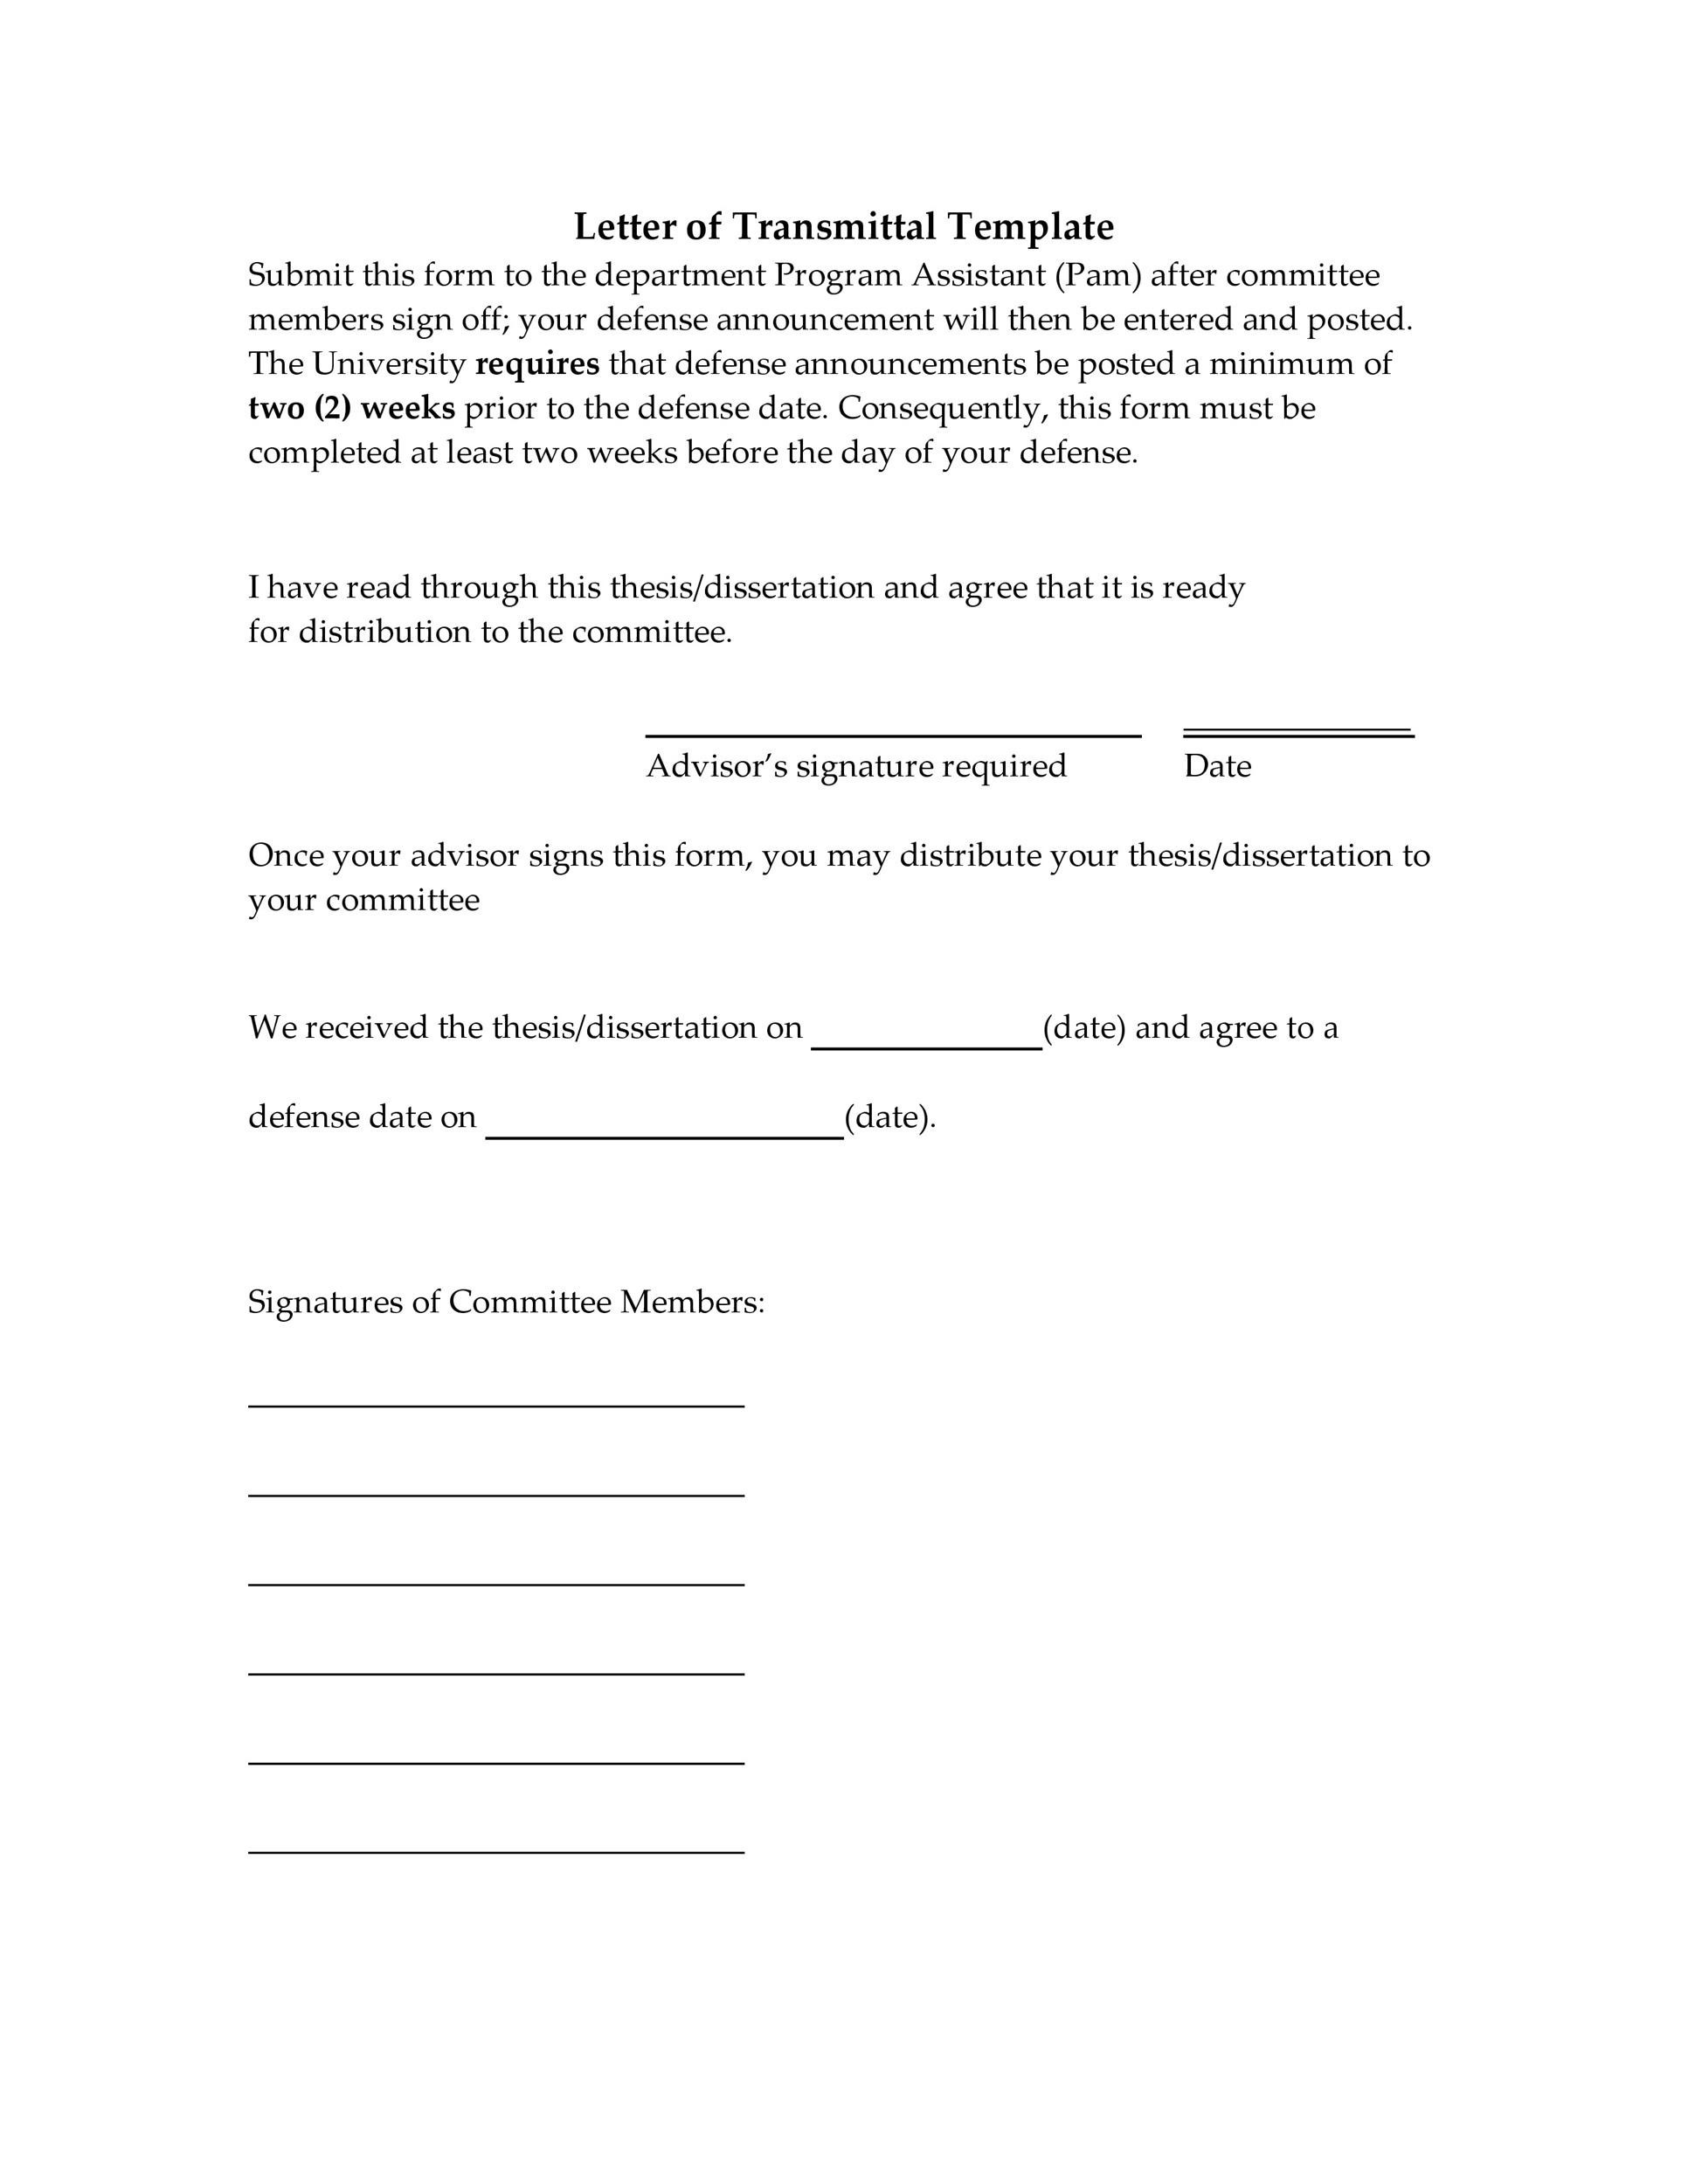 letter-of-transmittal-40-great-examples-templates-templatelab